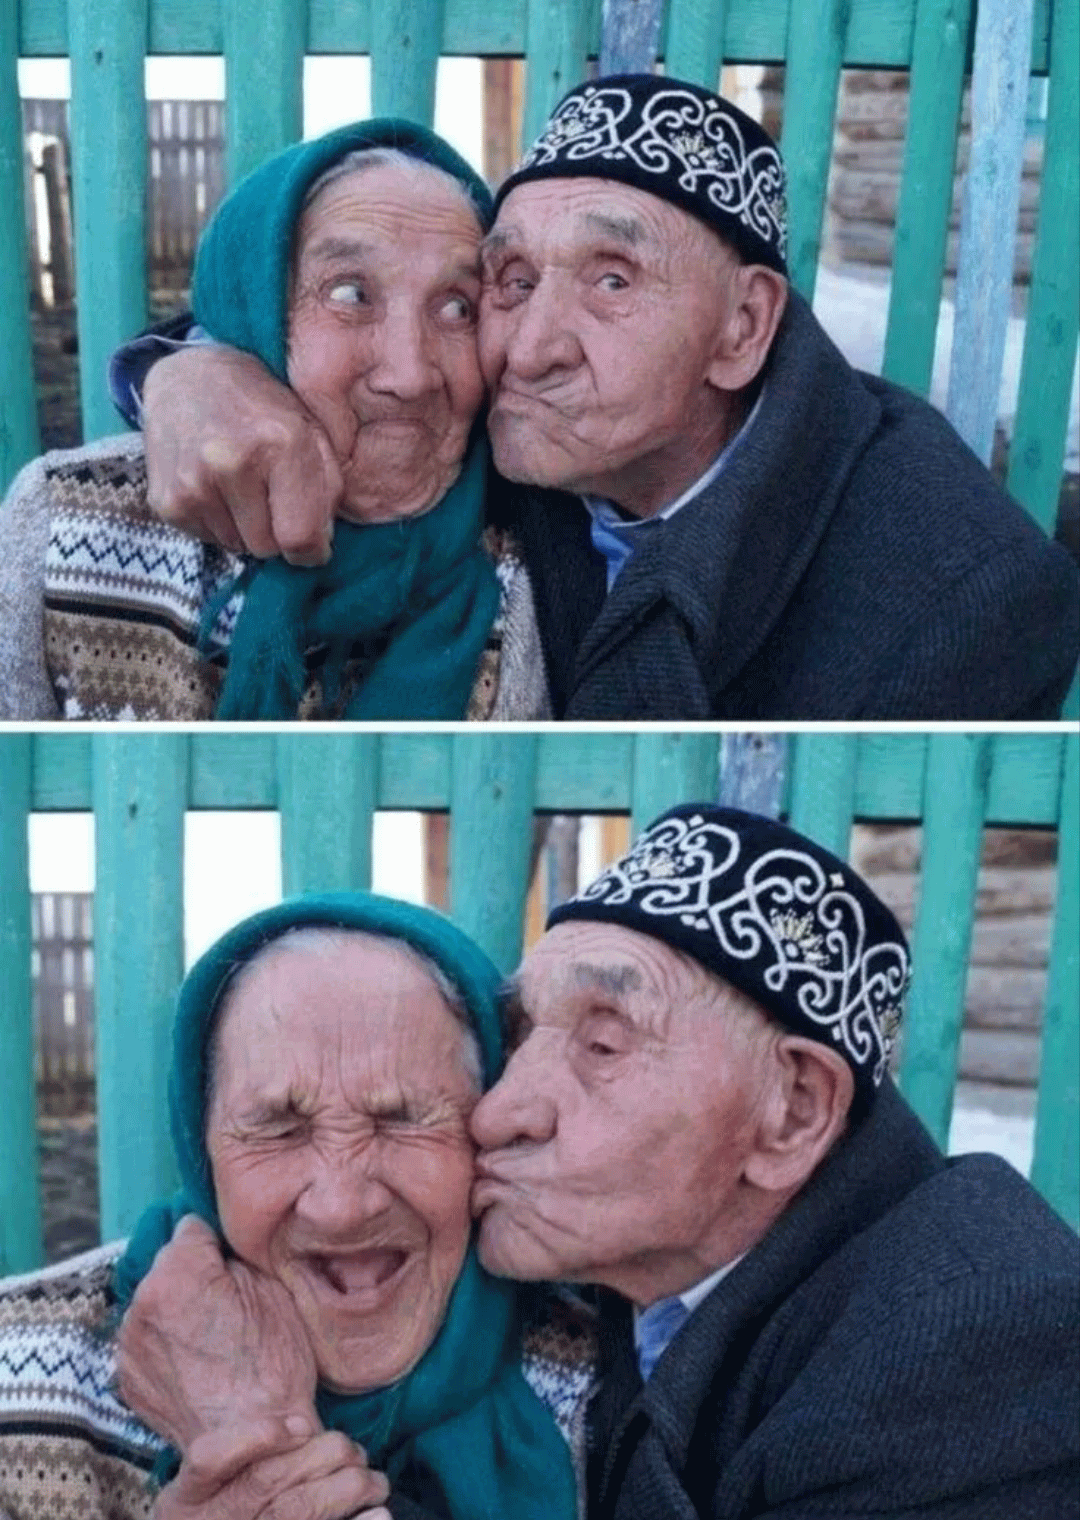 Old Man Kissing His Wife Funny Couple Image